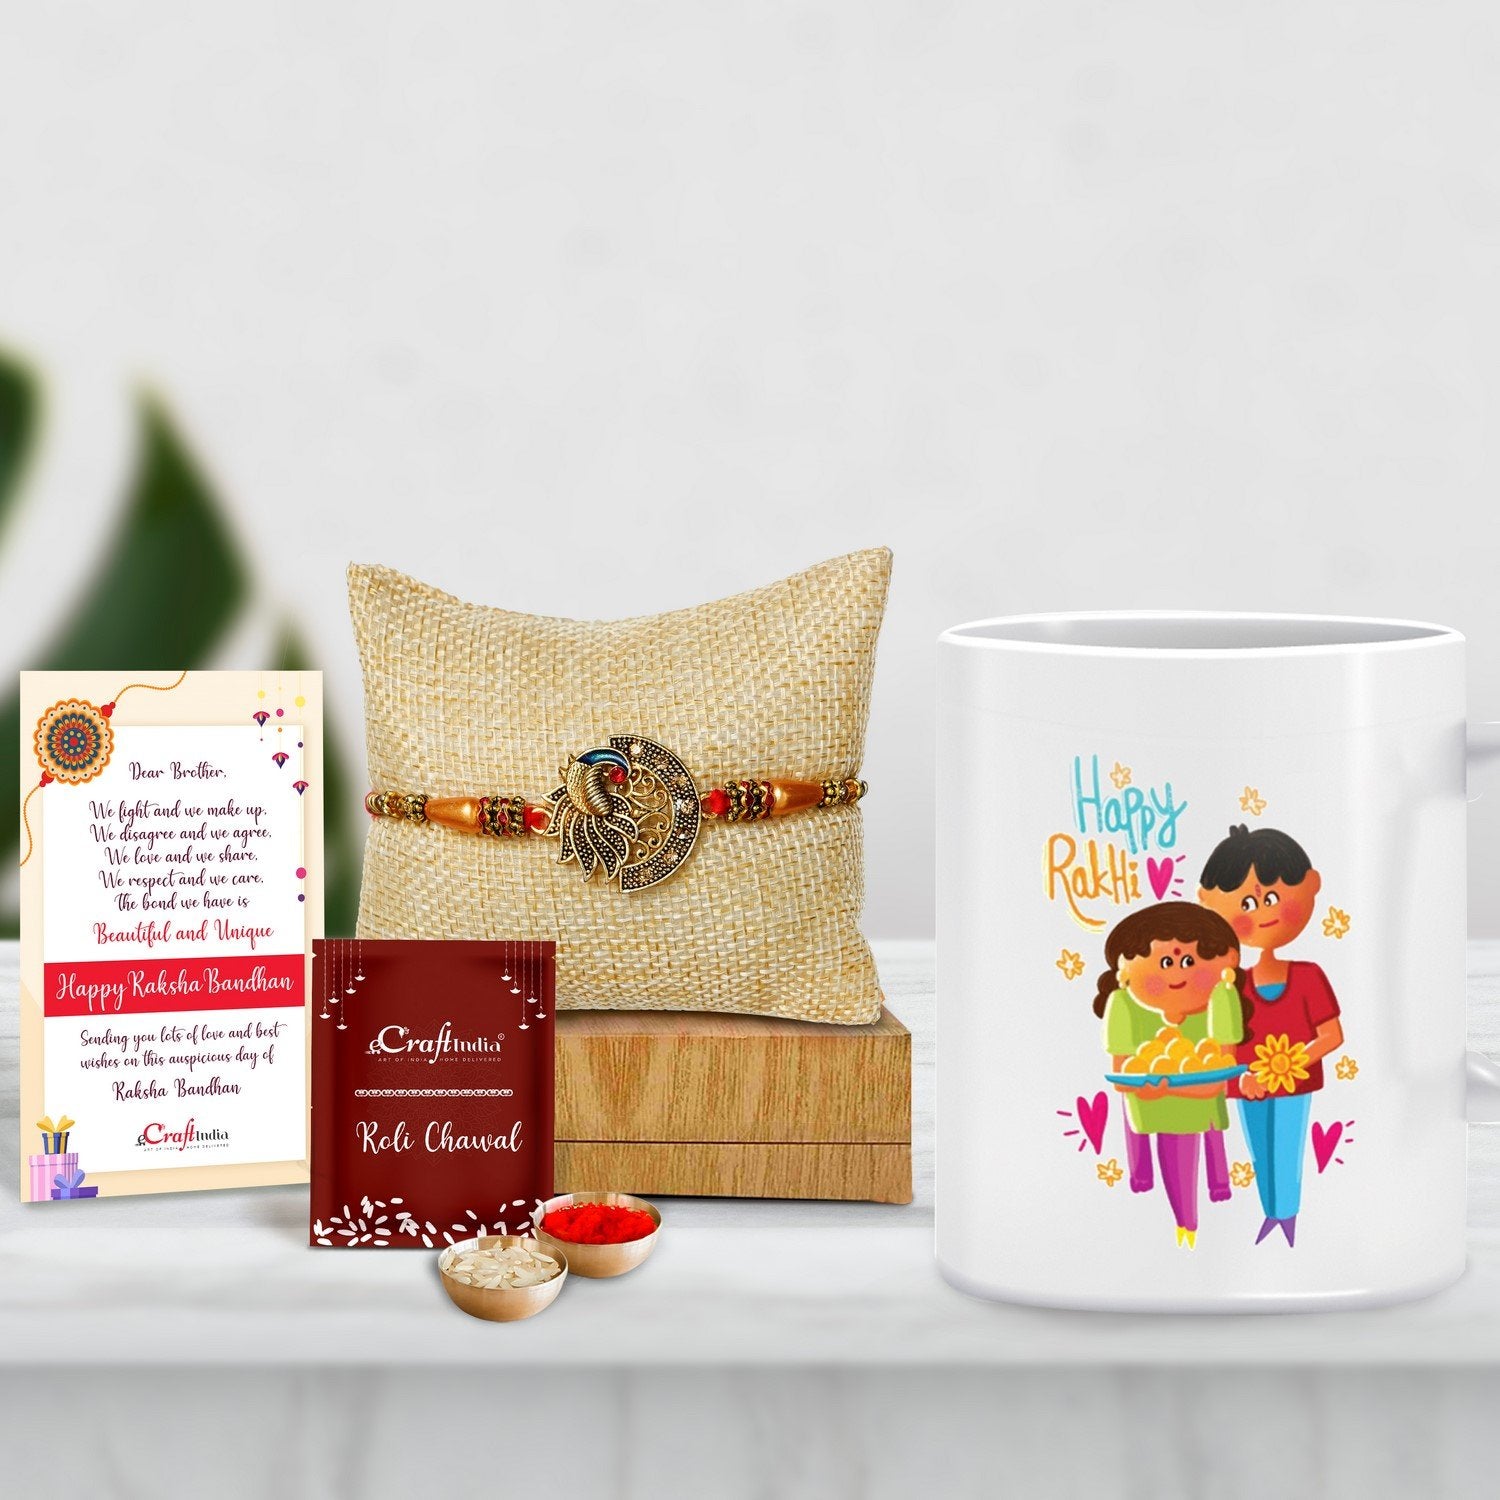 Designer Peacock Rakhi with Mug for Brother and Roli Chawal Pack, Best Wishes Greeting Card